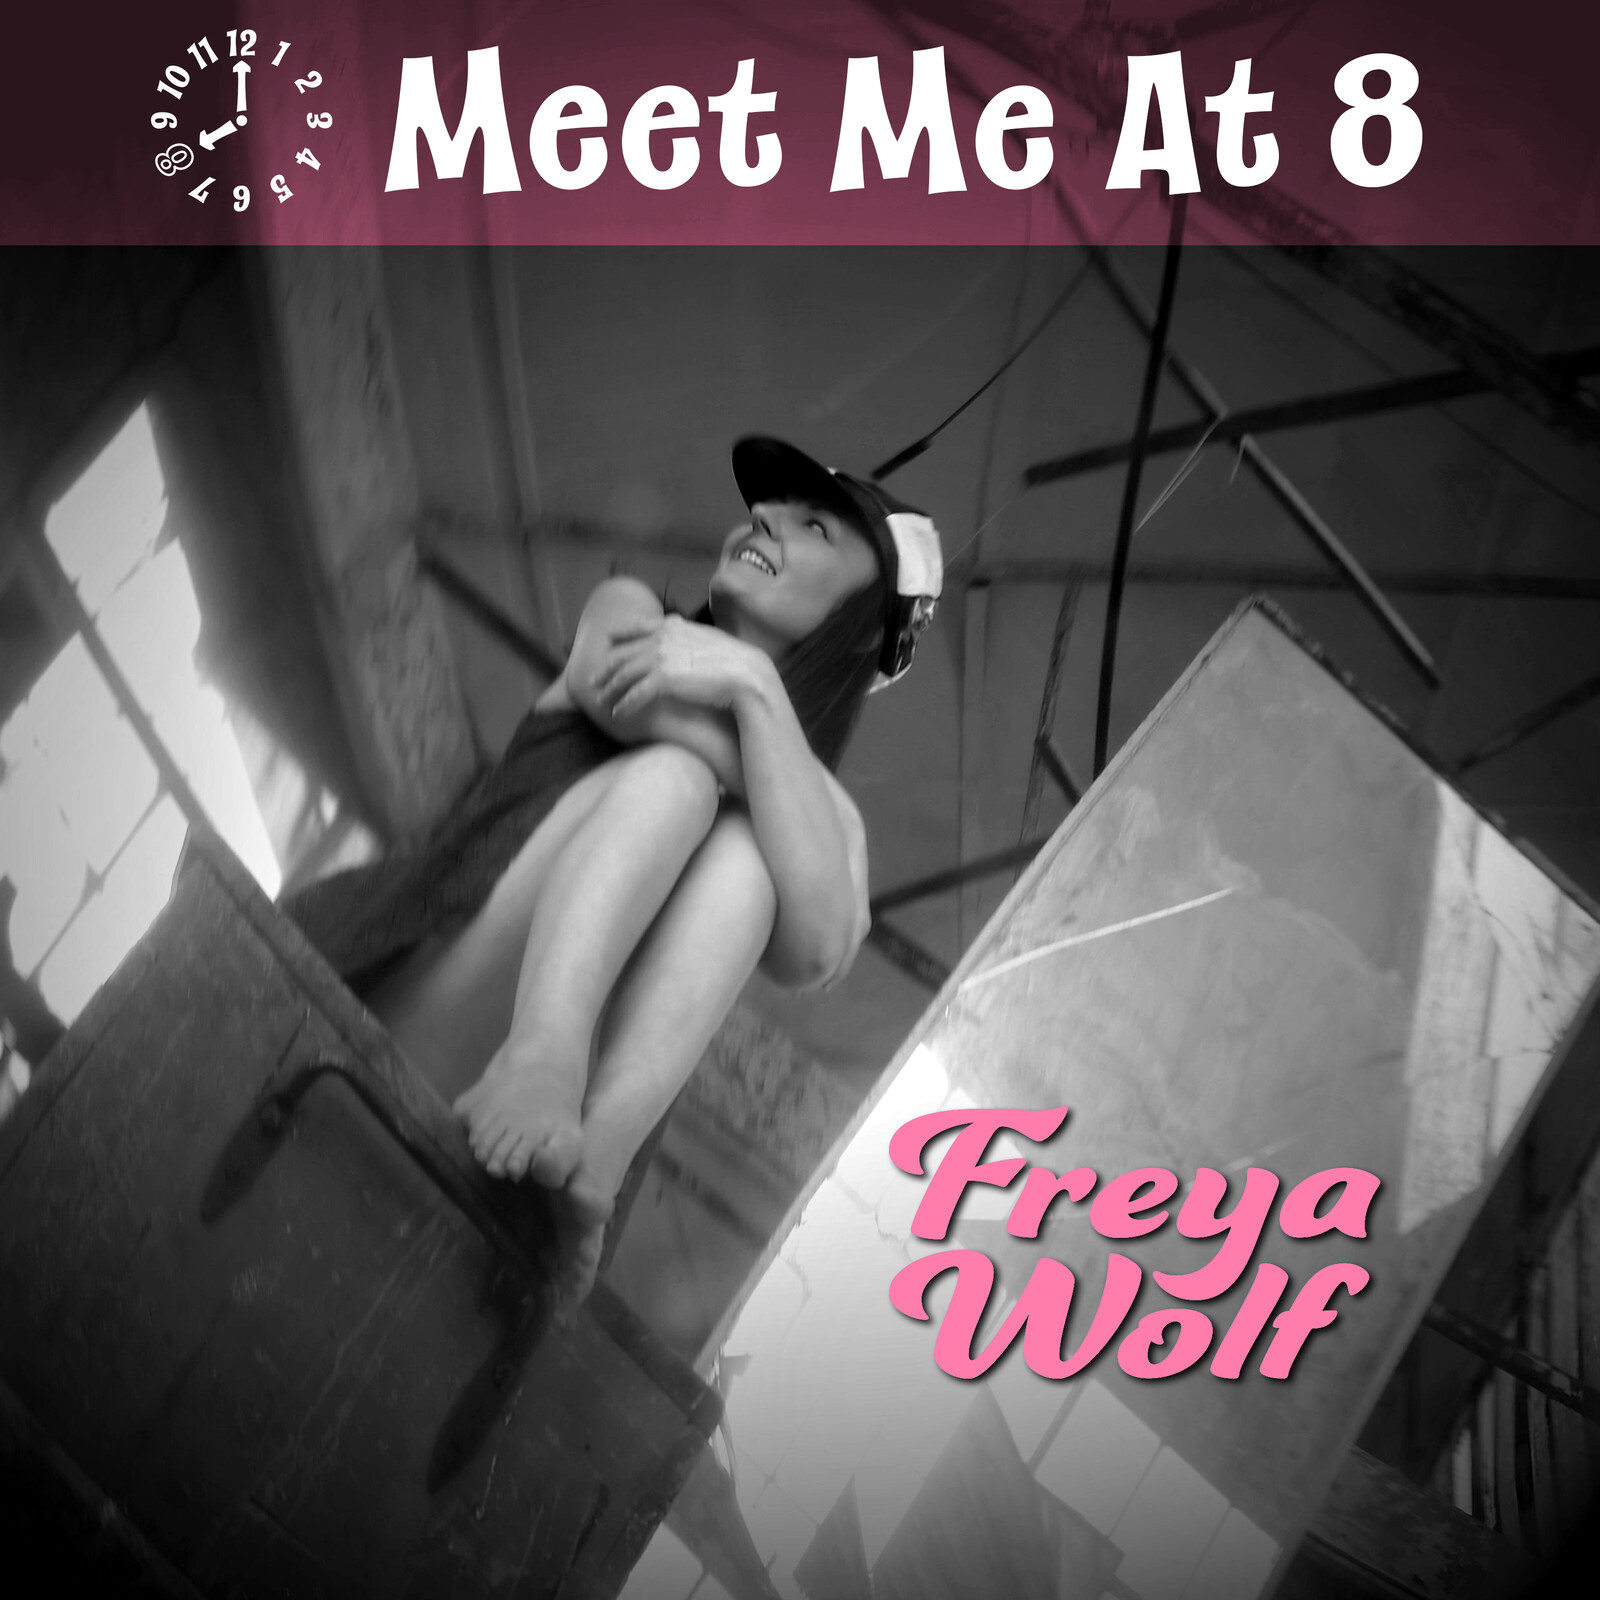 Freya Wolf - "Meet Me At 8" single cover.

Photography supplied by client.